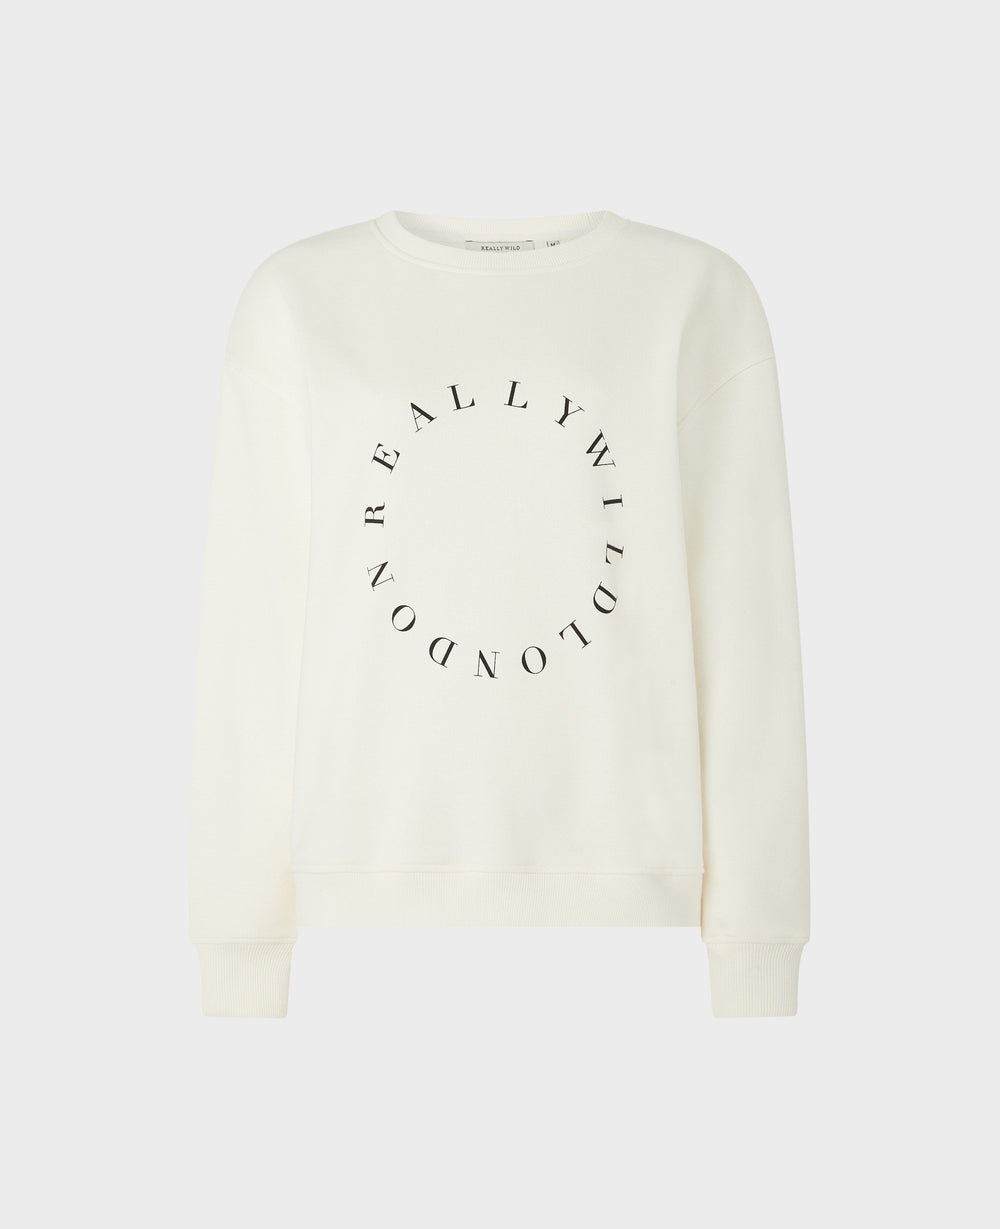 Our Really Wild logo print sweatshirt comes in 100% organic cotton and in cream. Perfect for pairing with denim.